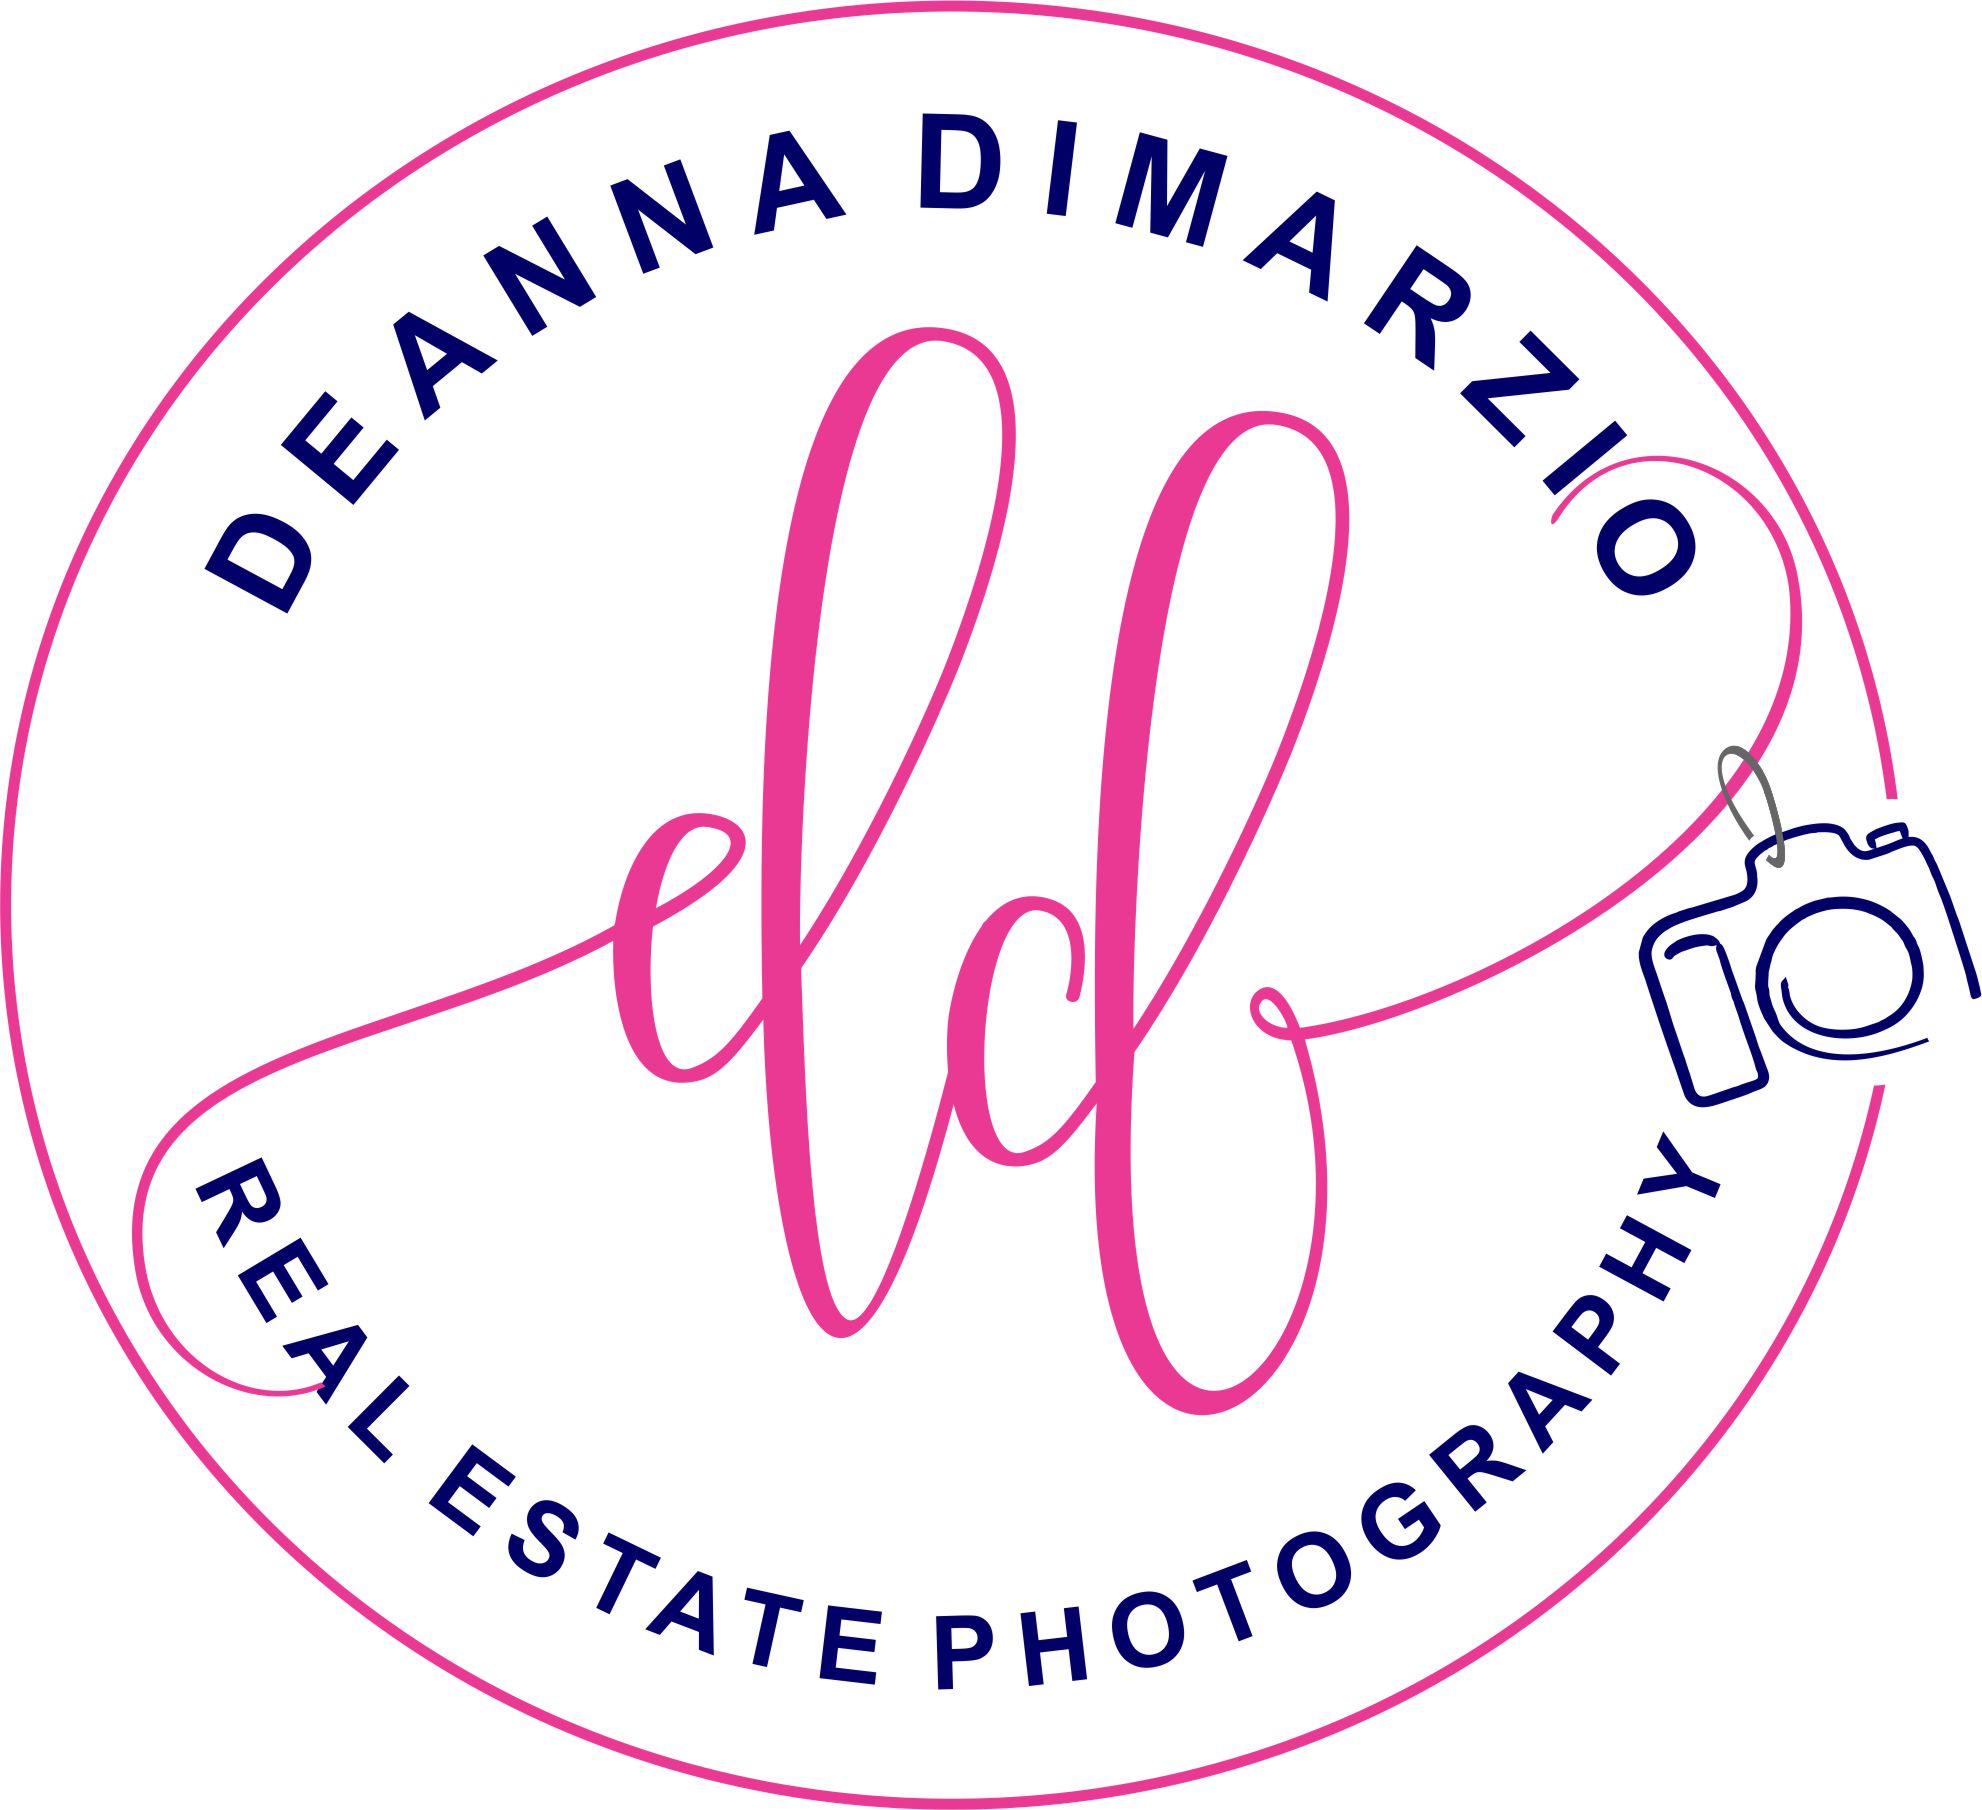 Deanna Dimarzio Architectural and Real Estate Photography